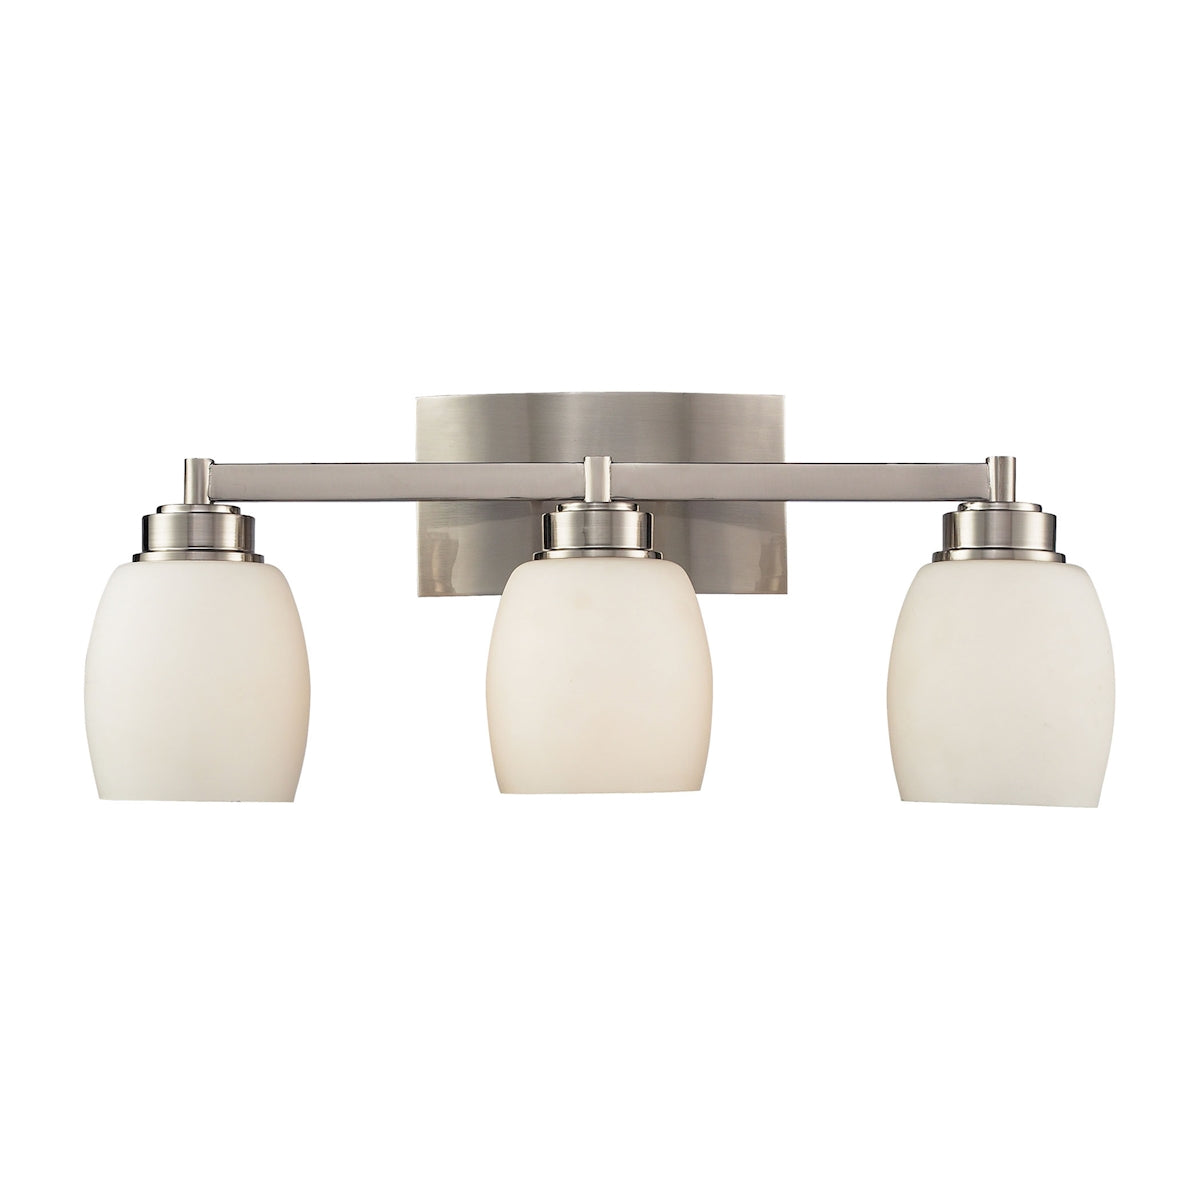 Northport 3-Light Vanity Lamp in Satin Nickel with Opal Glass